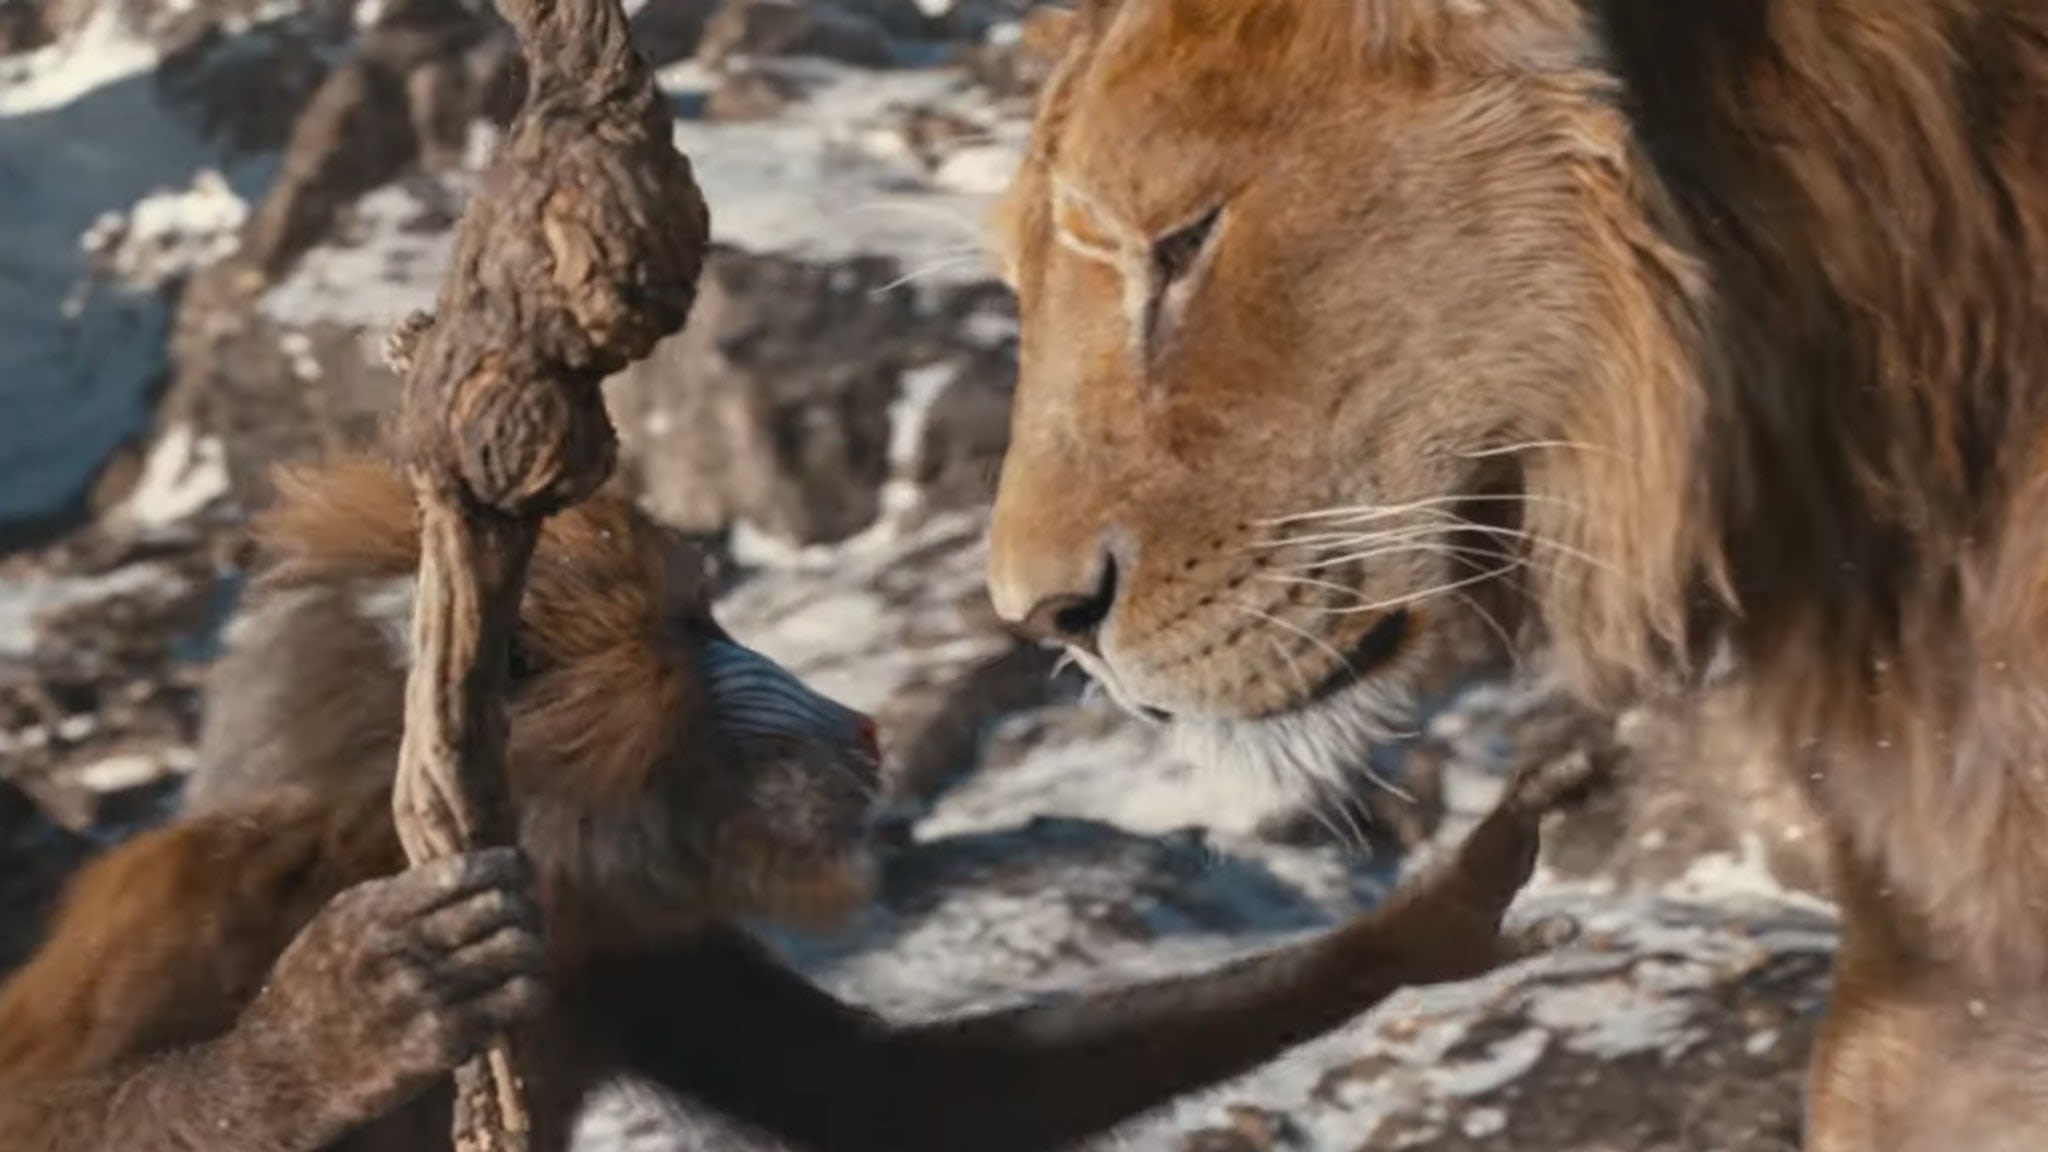 Mufasa: The Lion King Trailer 'Introduces' Blue Ivy Carter, Thrilling Action Sequences, Feud with Scar